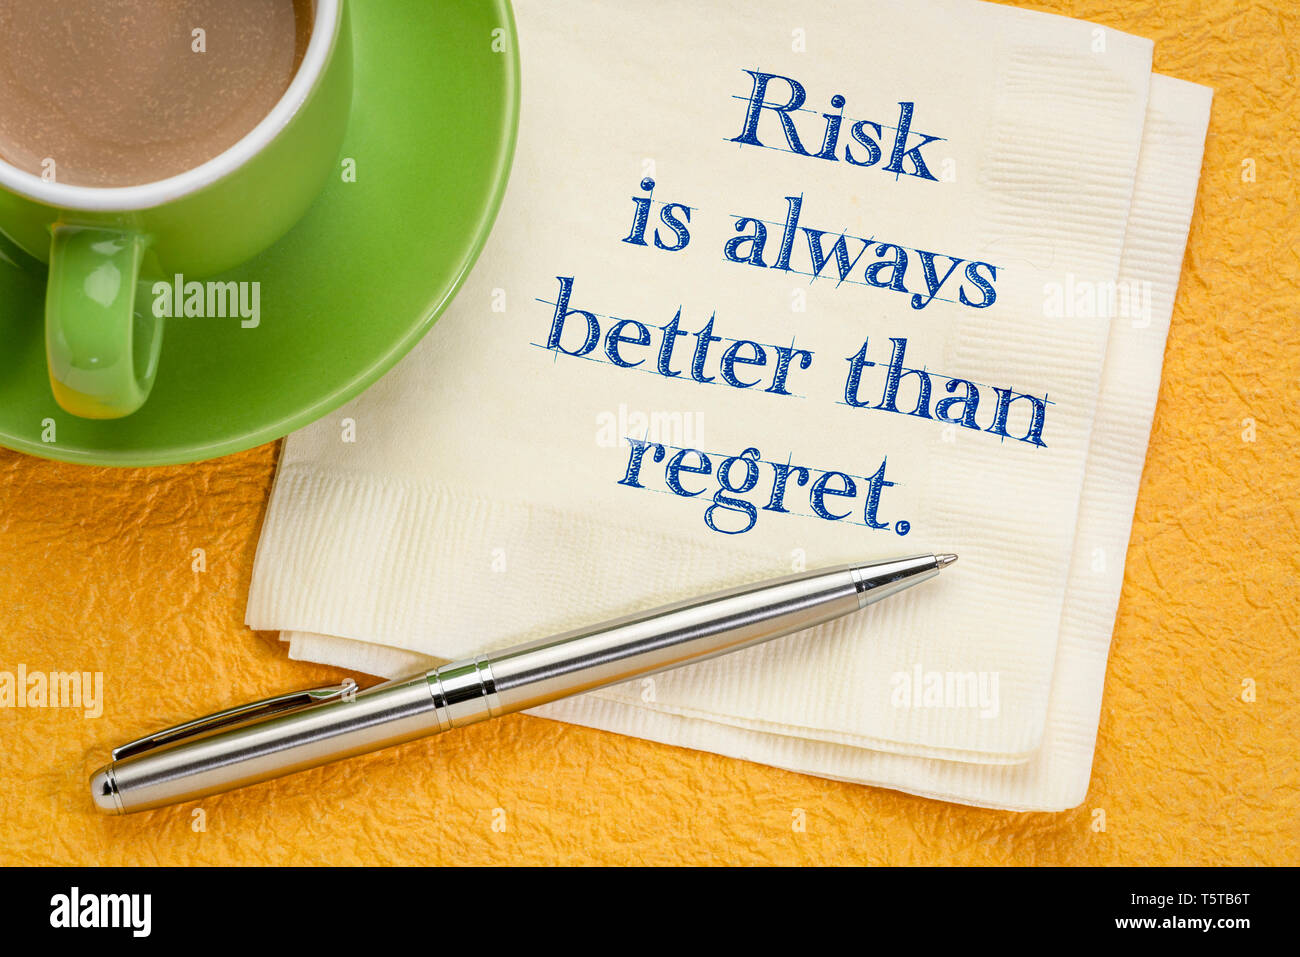 risk is always better than regret - inspirational handwriting on a napkin with a cup of coffee Stock Photo